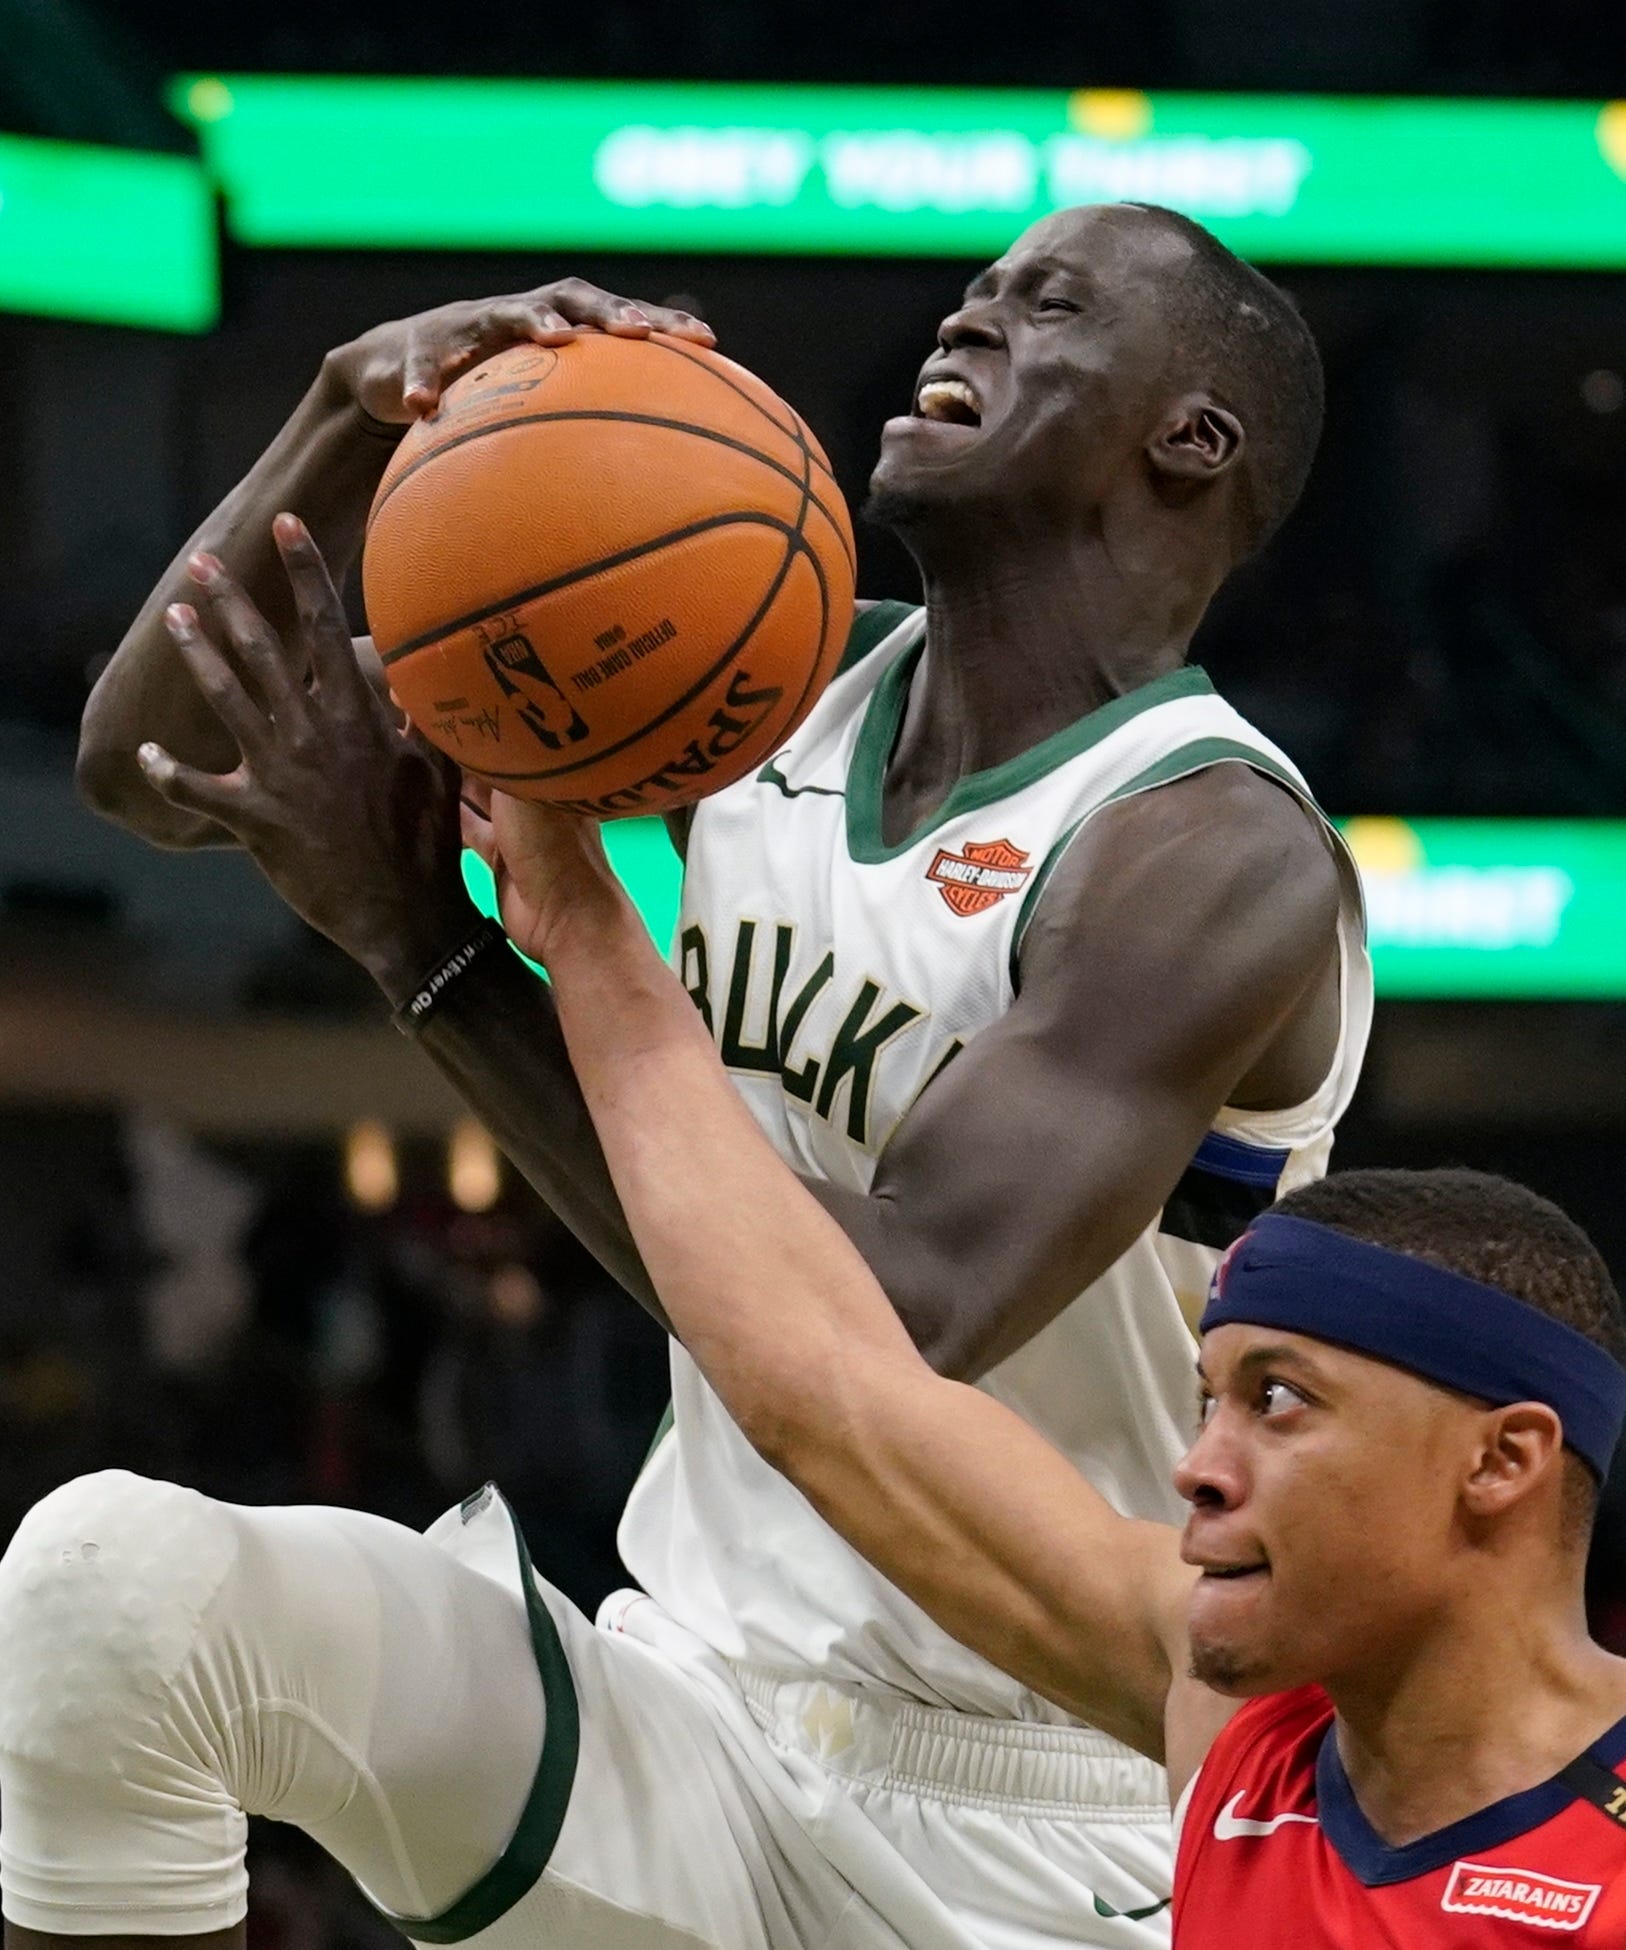 The Pistons acquired center Thon Maker (pictured) from the Bucks on Wednesday for Stanley Johnson.